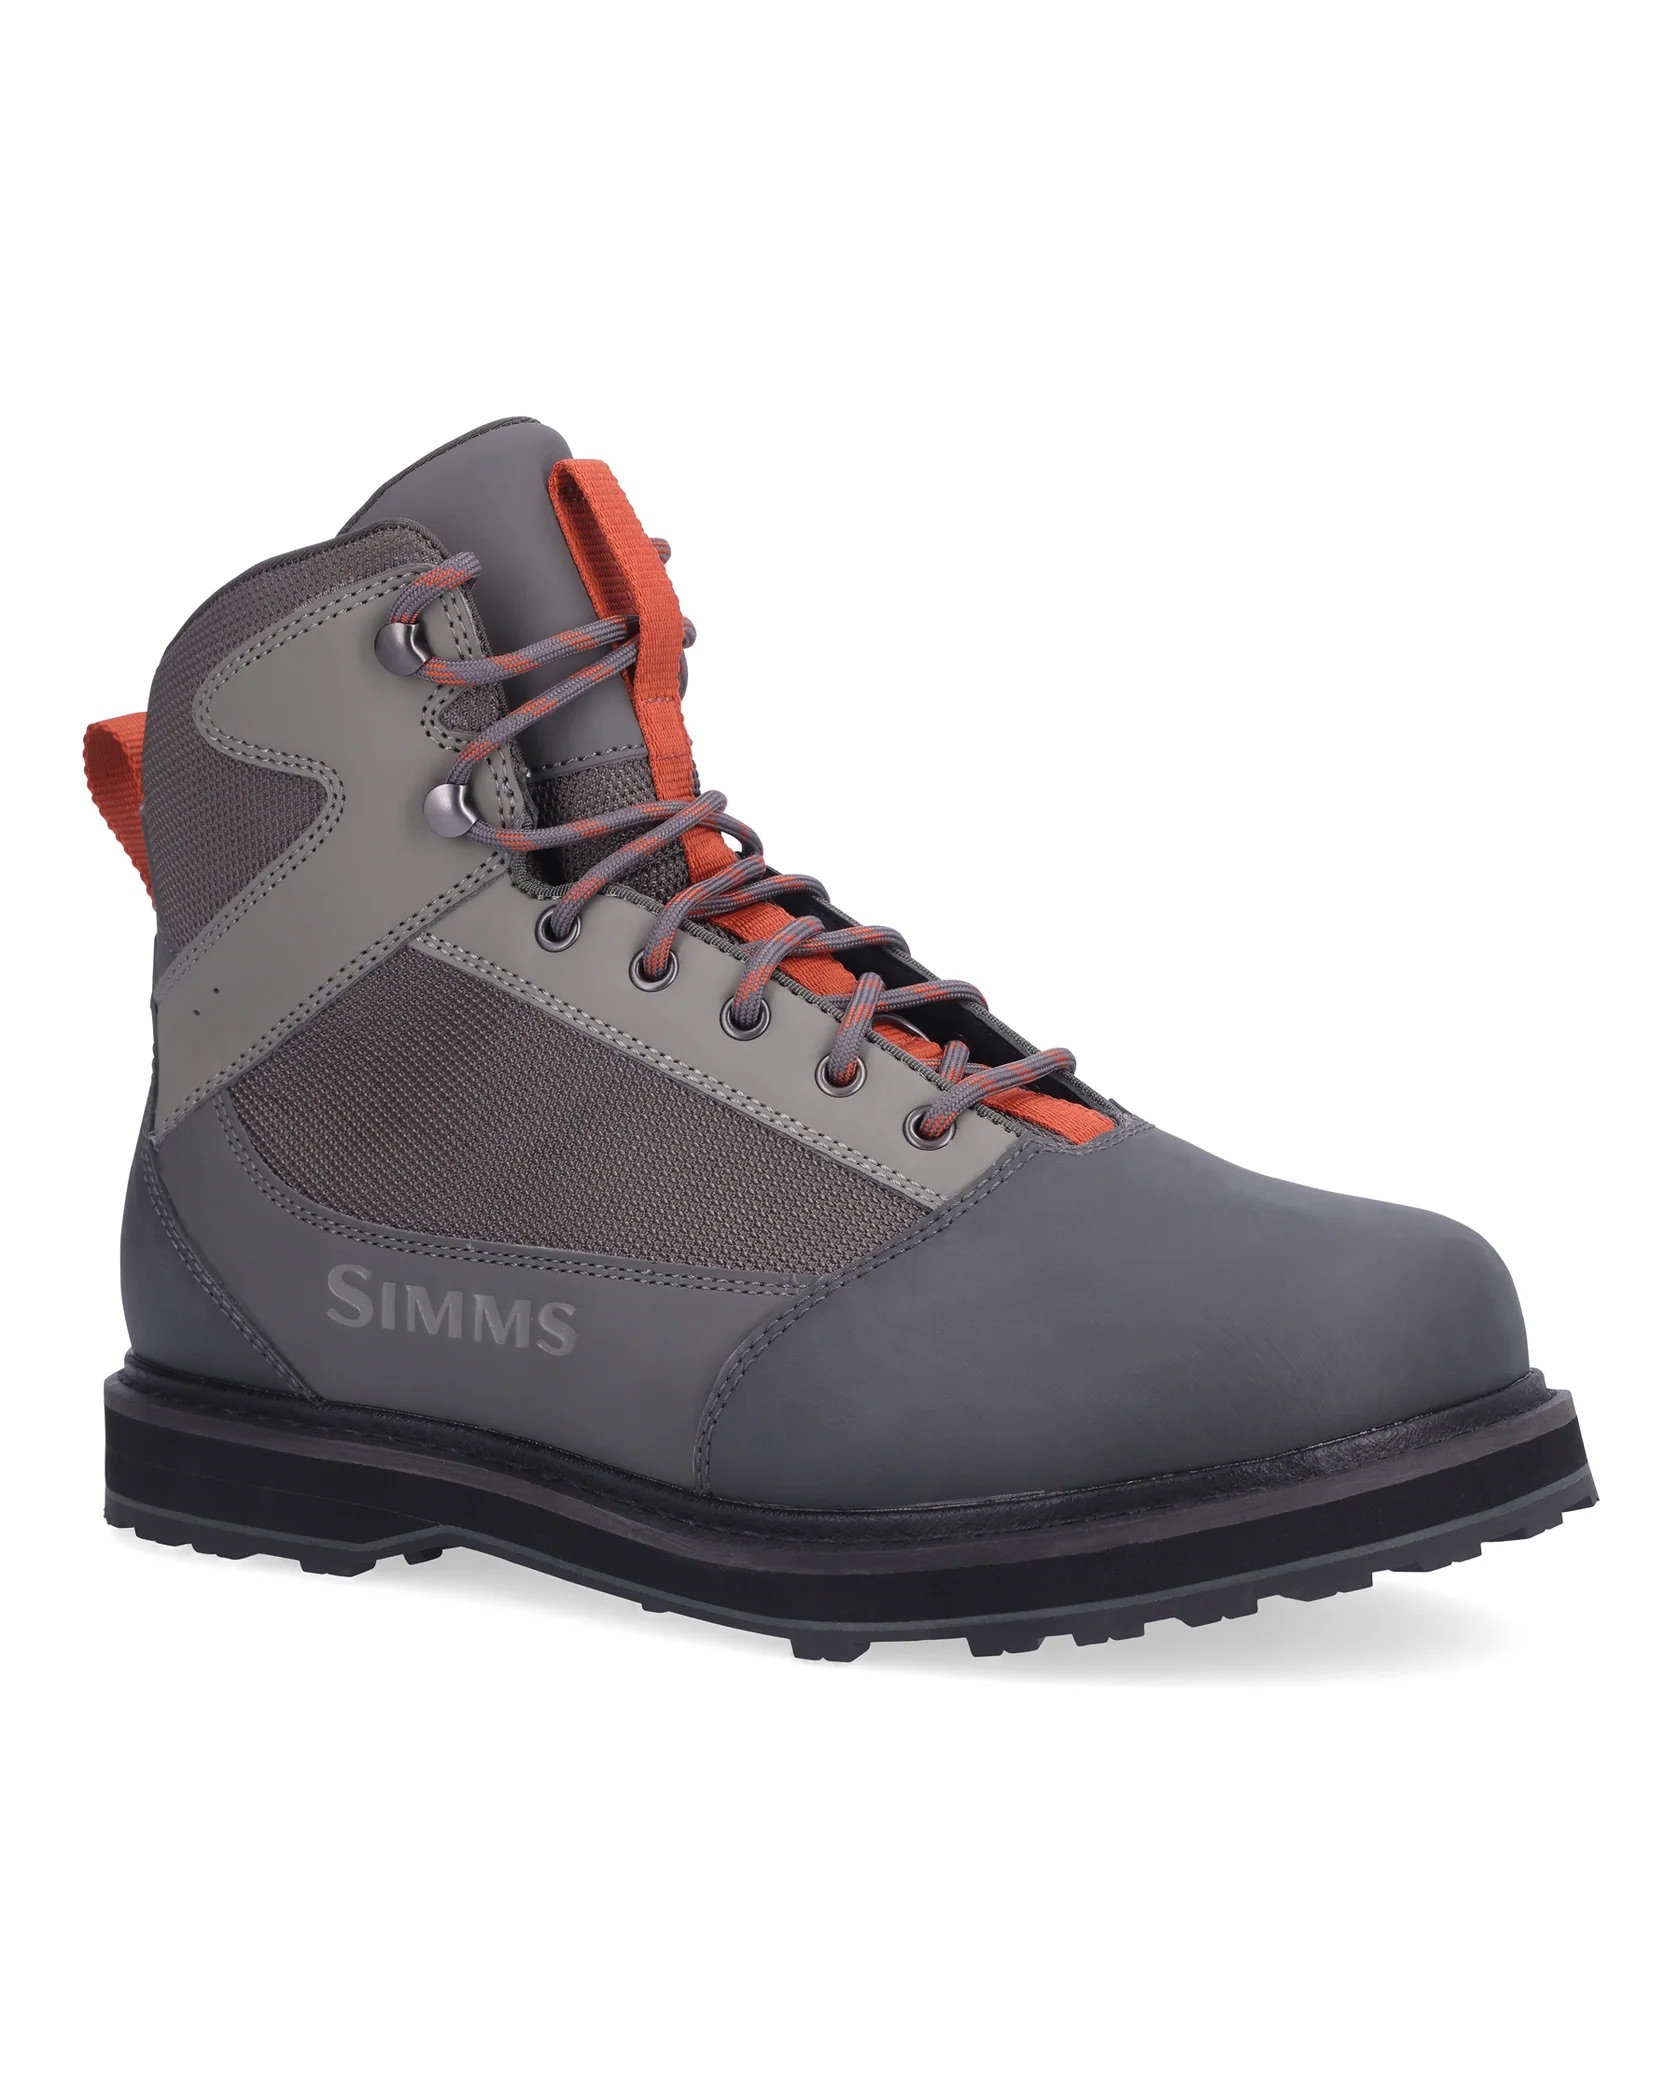 Simms Tributary Wading Boot - Rubber - Size 12